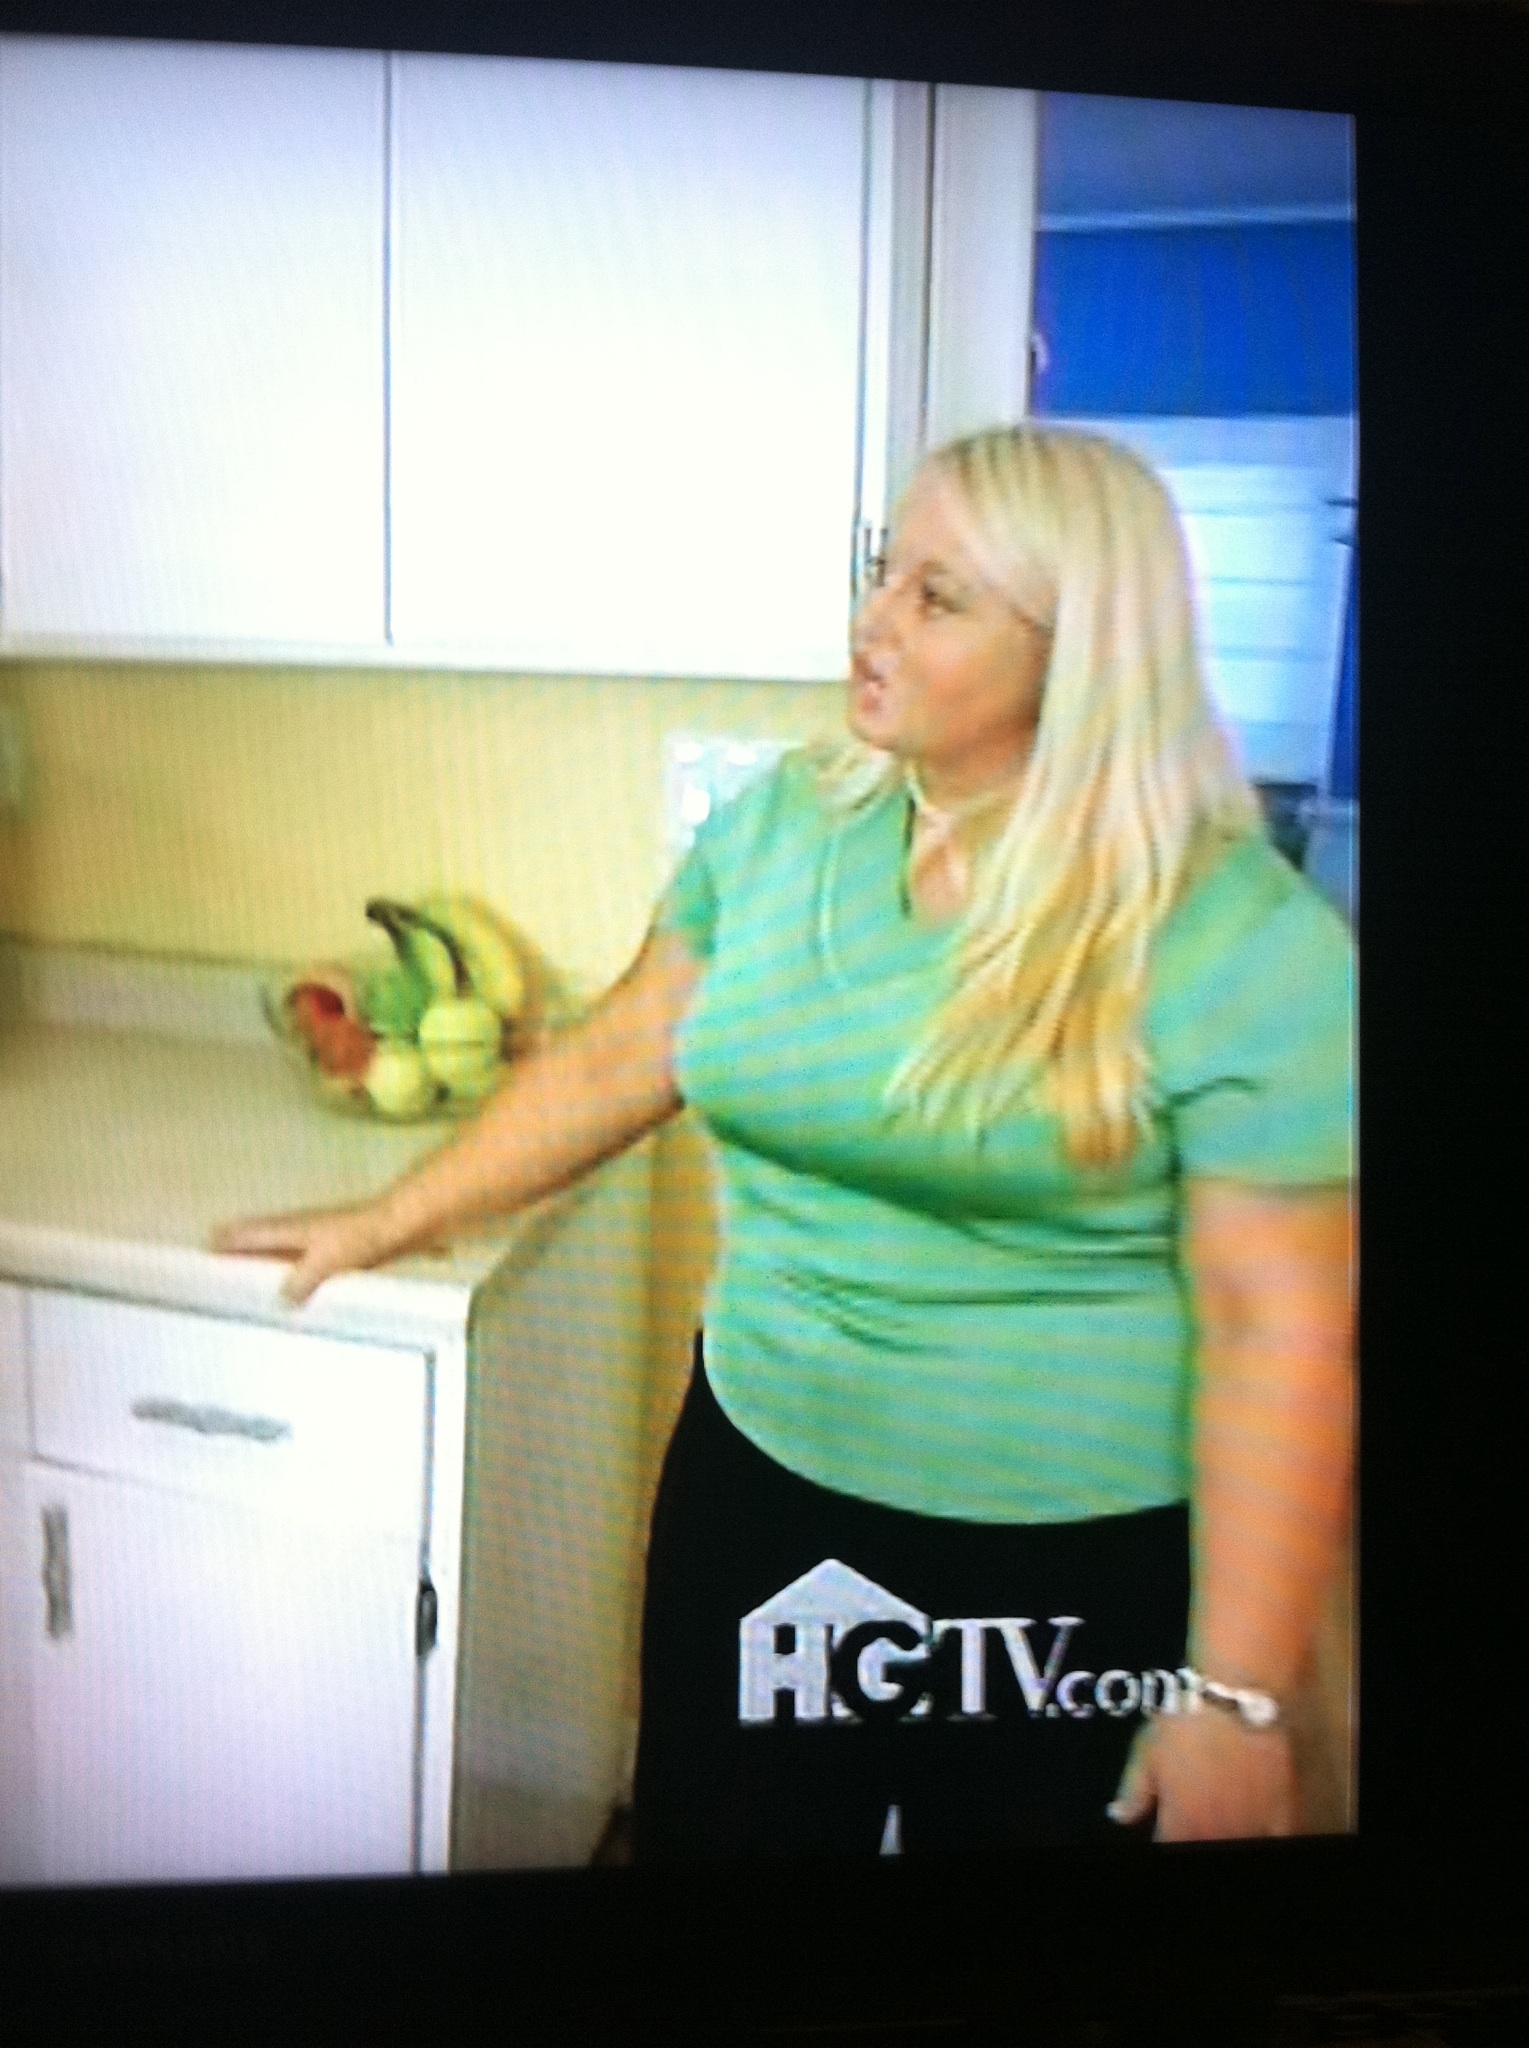 HGTV's My House is Worth What?